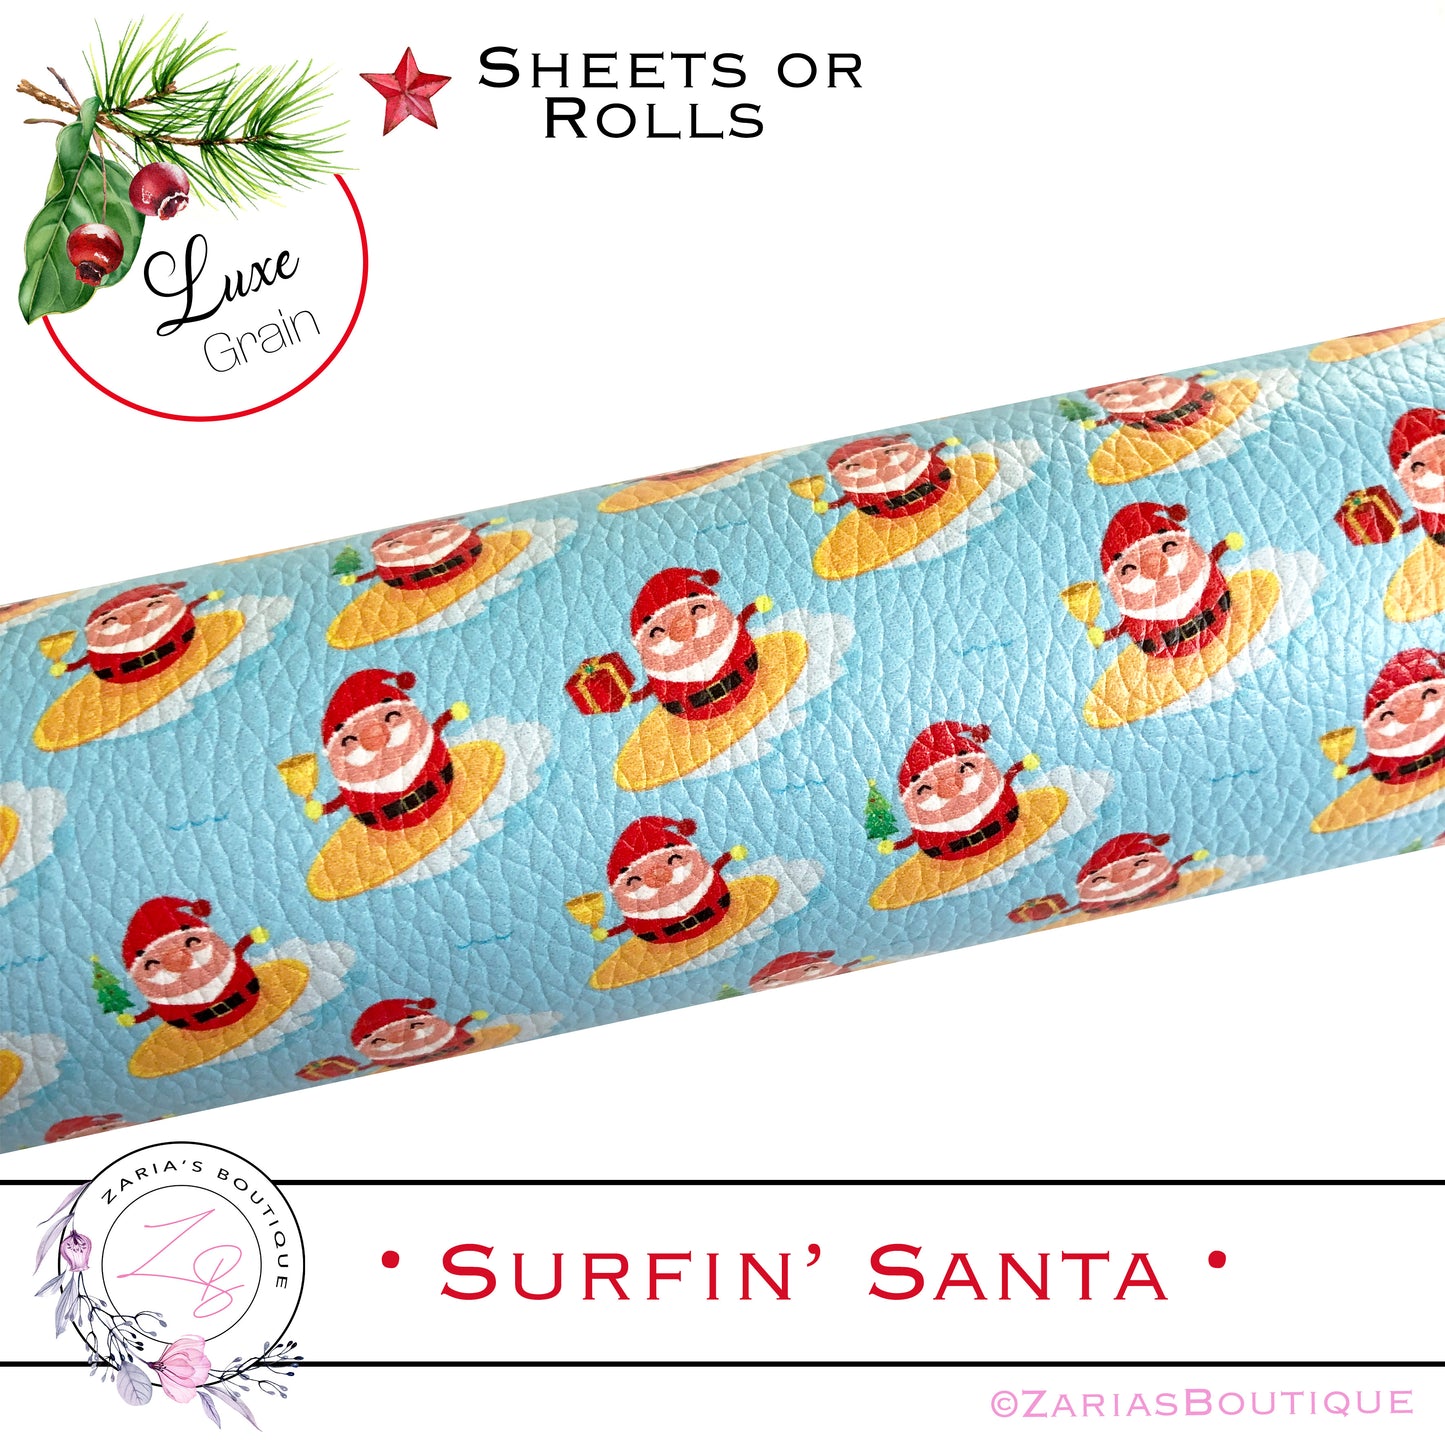 ⋅ Surfin' Santa ⋅ Luxe Vegan Faux Leather ⋅ Sheets or Rolls! ⋅